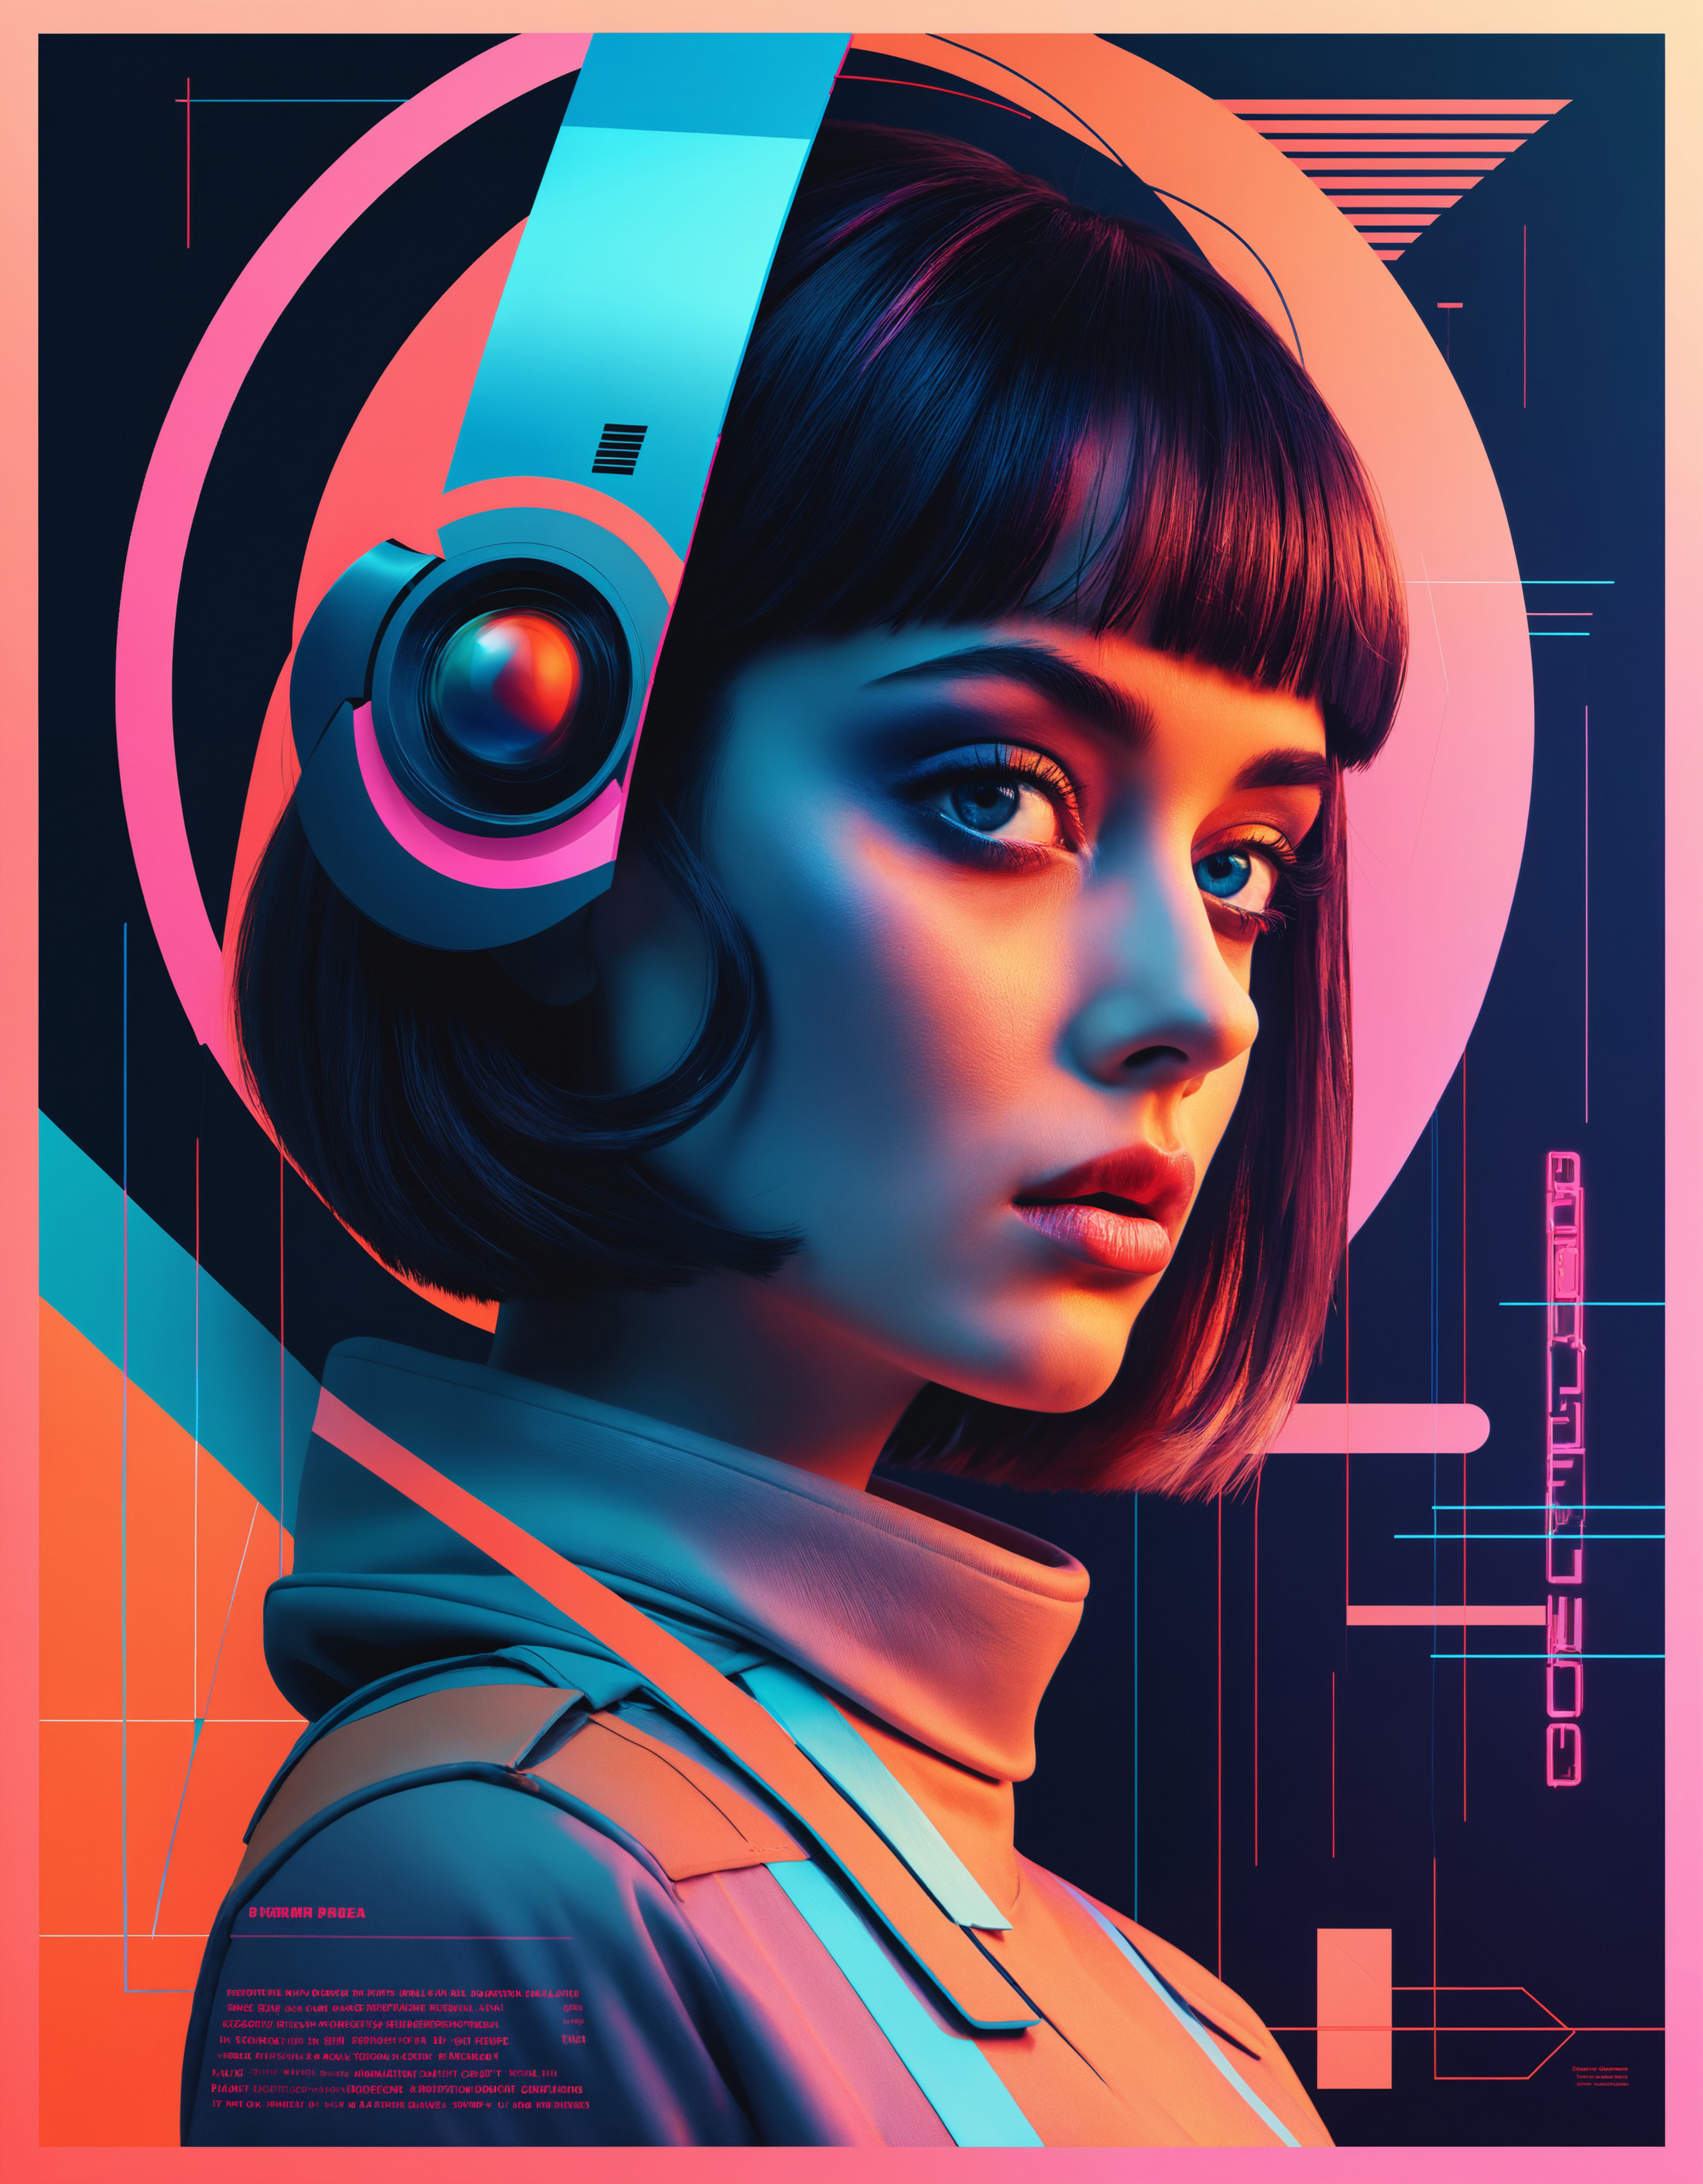 women, flat shading, bizarre technology, faded colors, faded bright colors, cyber-inspired typography, futuristic imagery,...